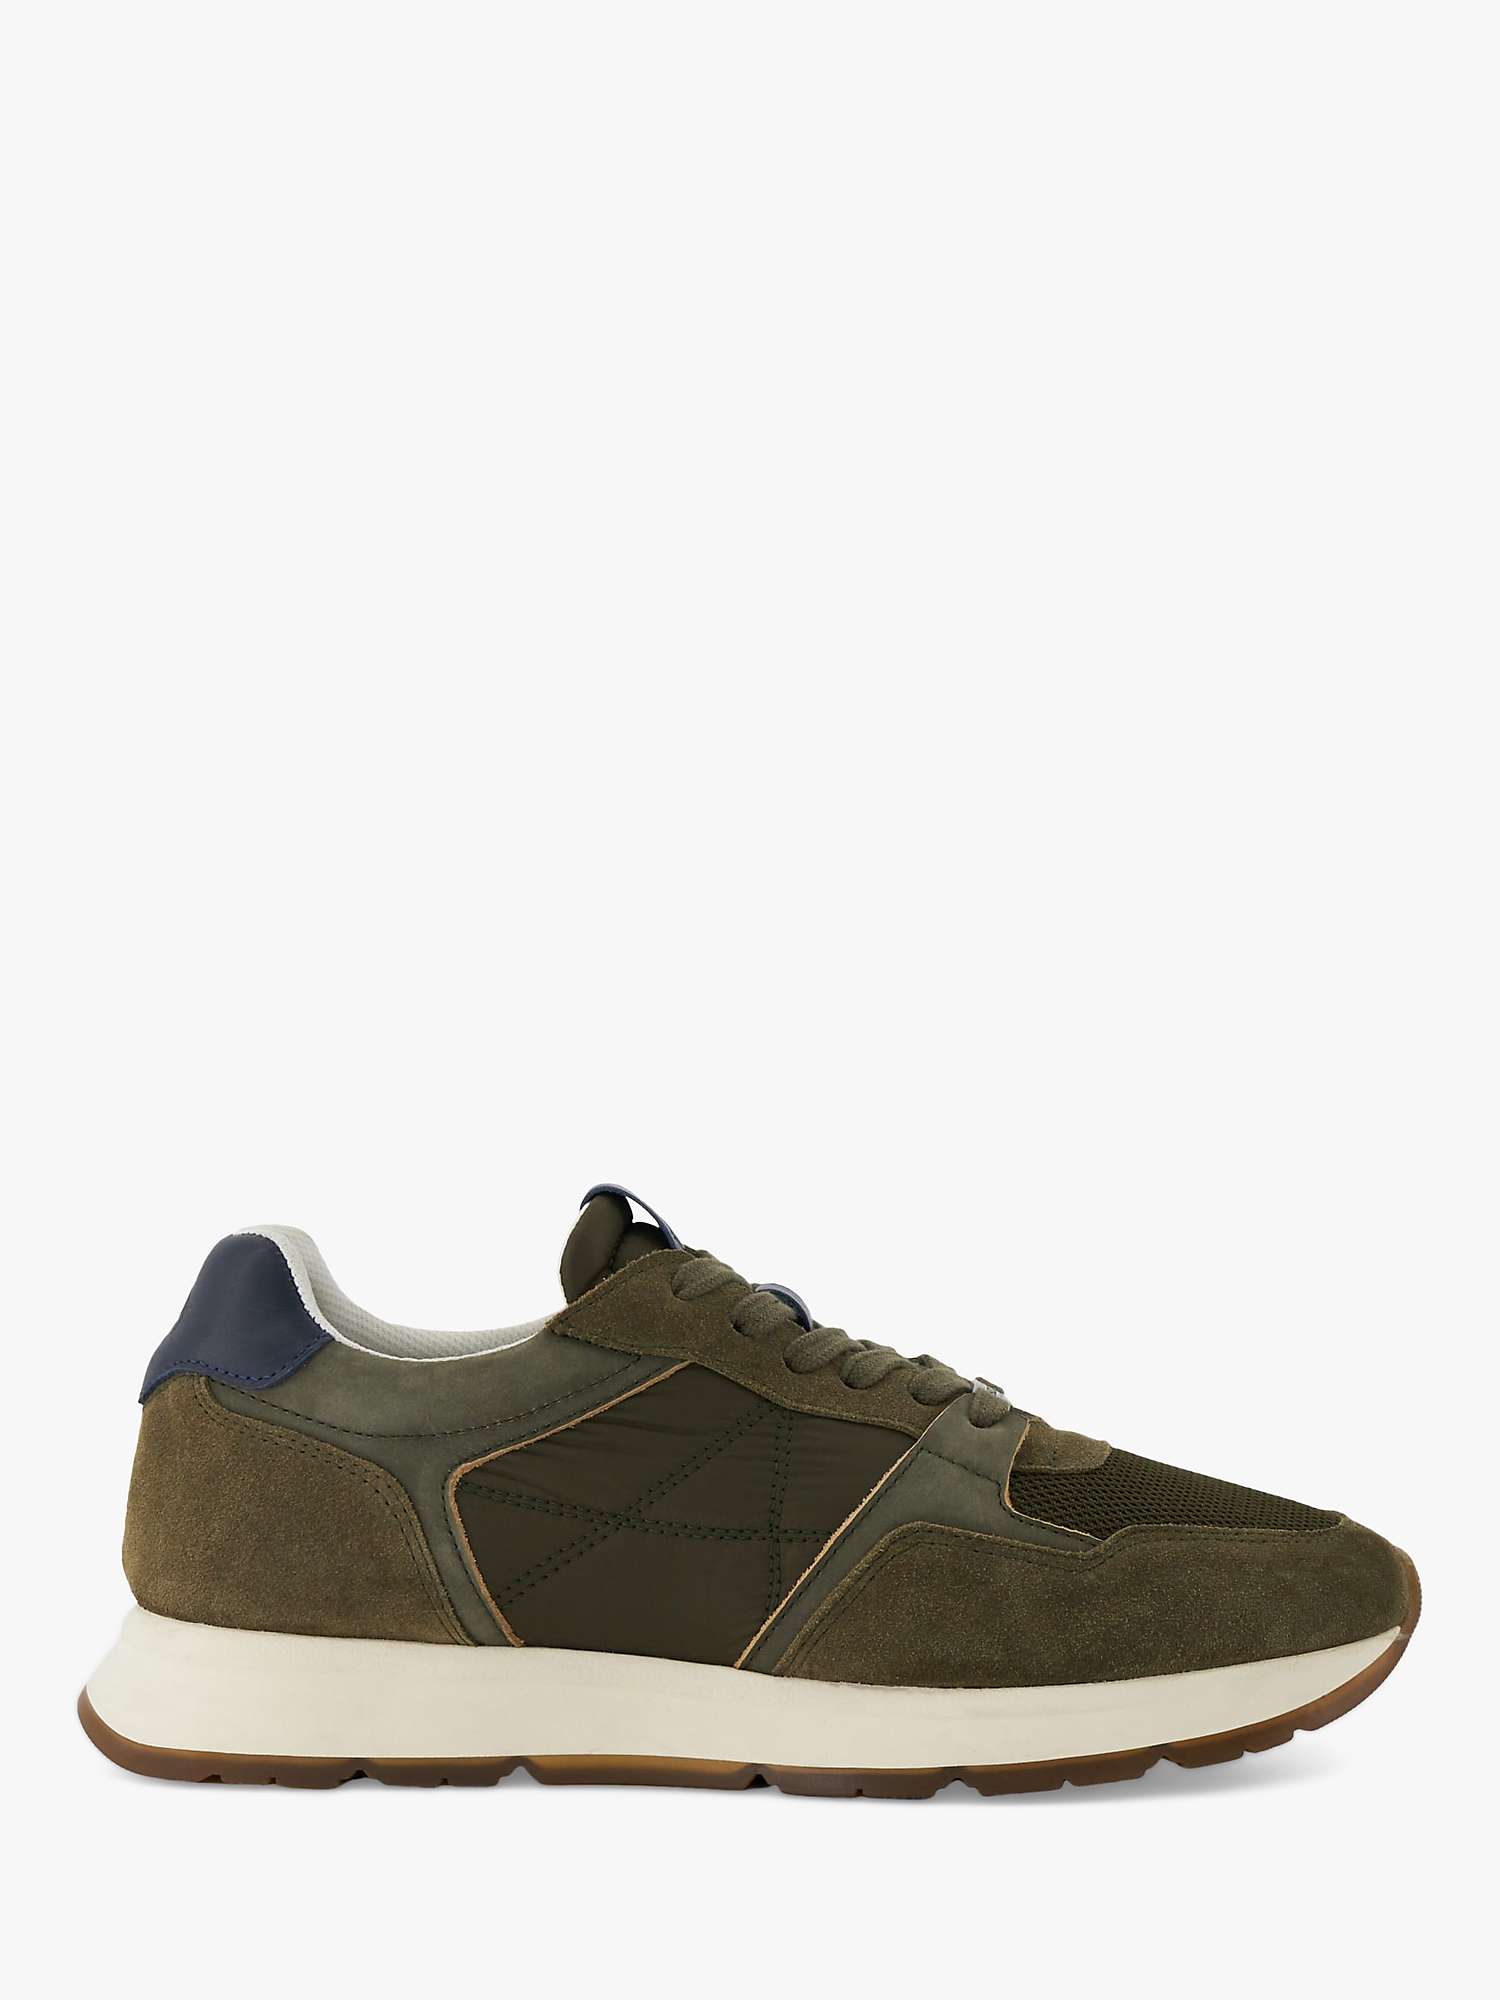 Dune Tangent Suede Trainers, Khaki at John Lewis & Partners